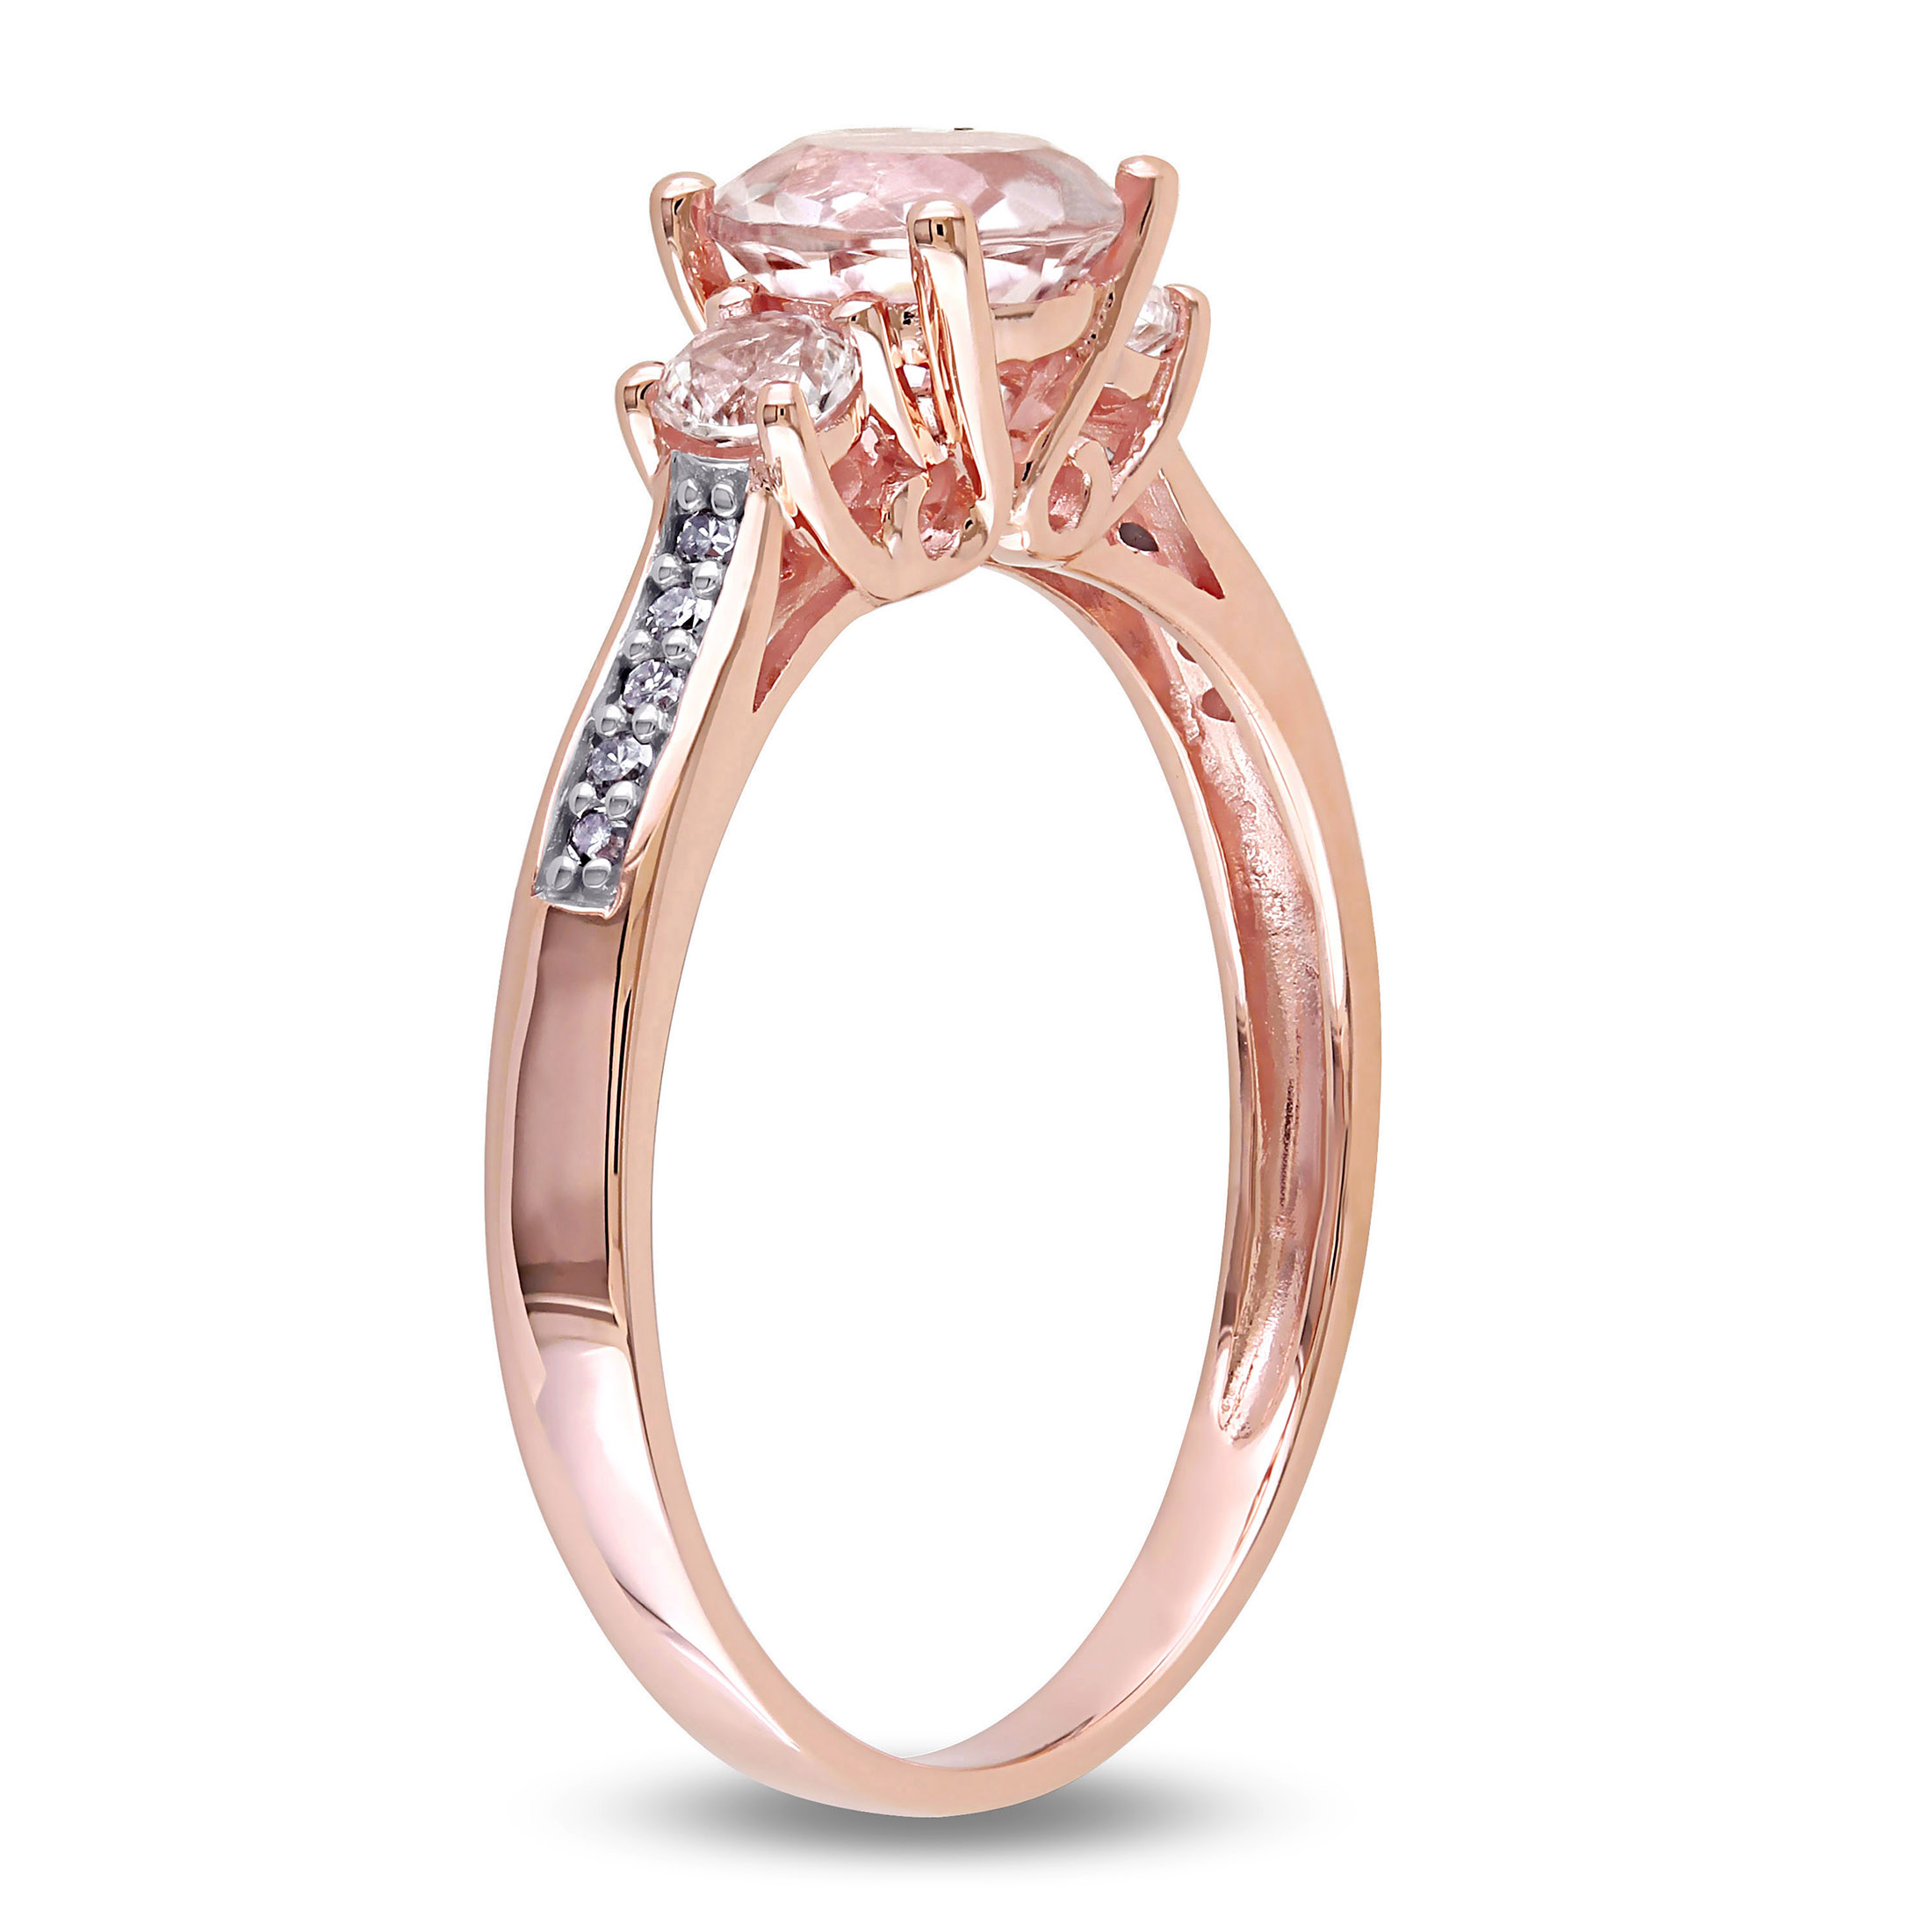 Everly Women's 1-1/7 CT Morganite & Created White Sapphire Diamond Accent 10kt RG Engagement Ring - image 4 of 7